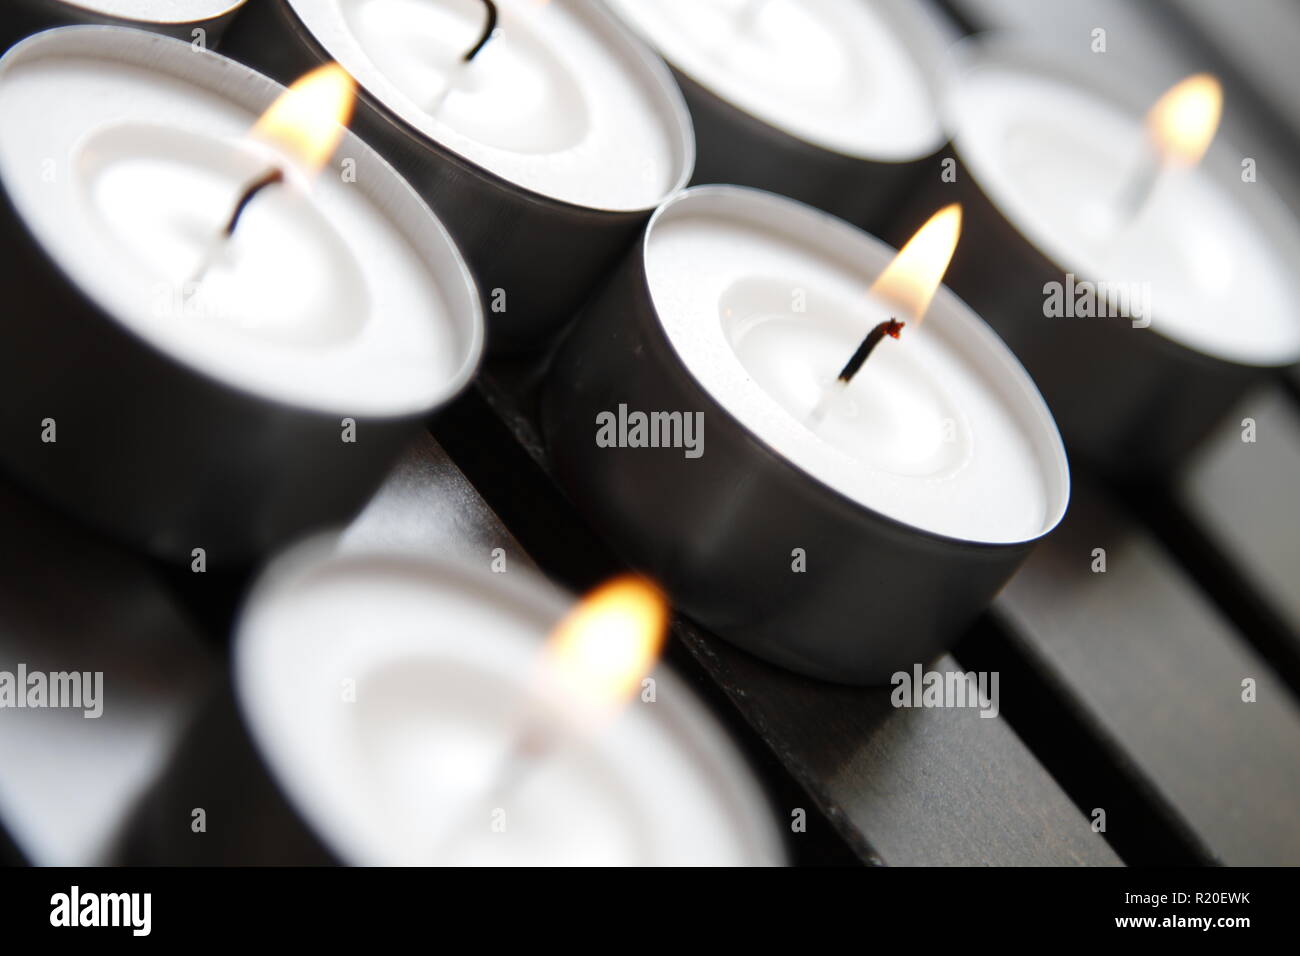 Tea lights on a wooden bench Stock Photo